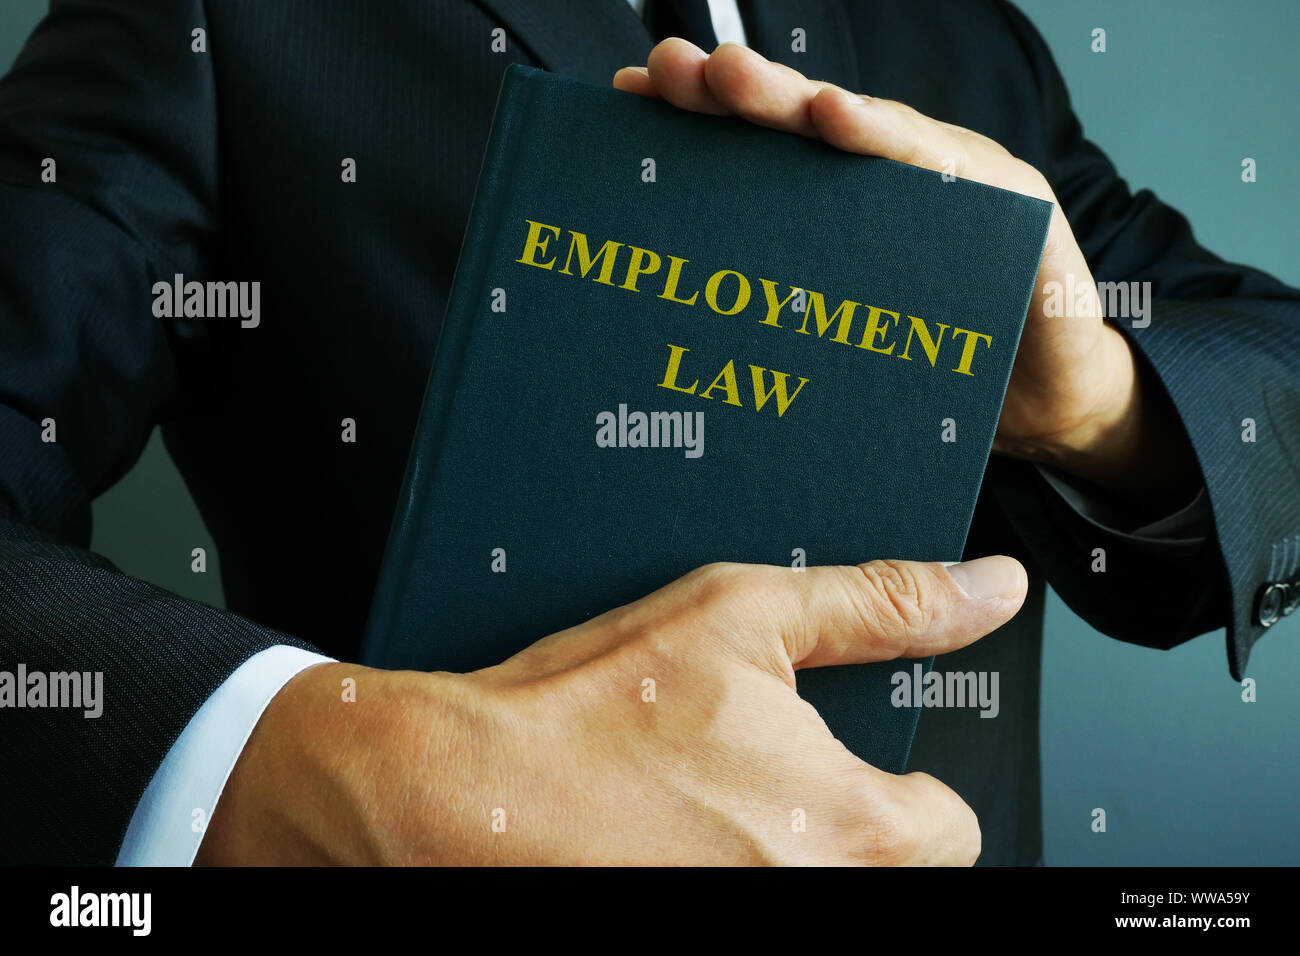 Employment law in the hands of a businessman. Stock Photo